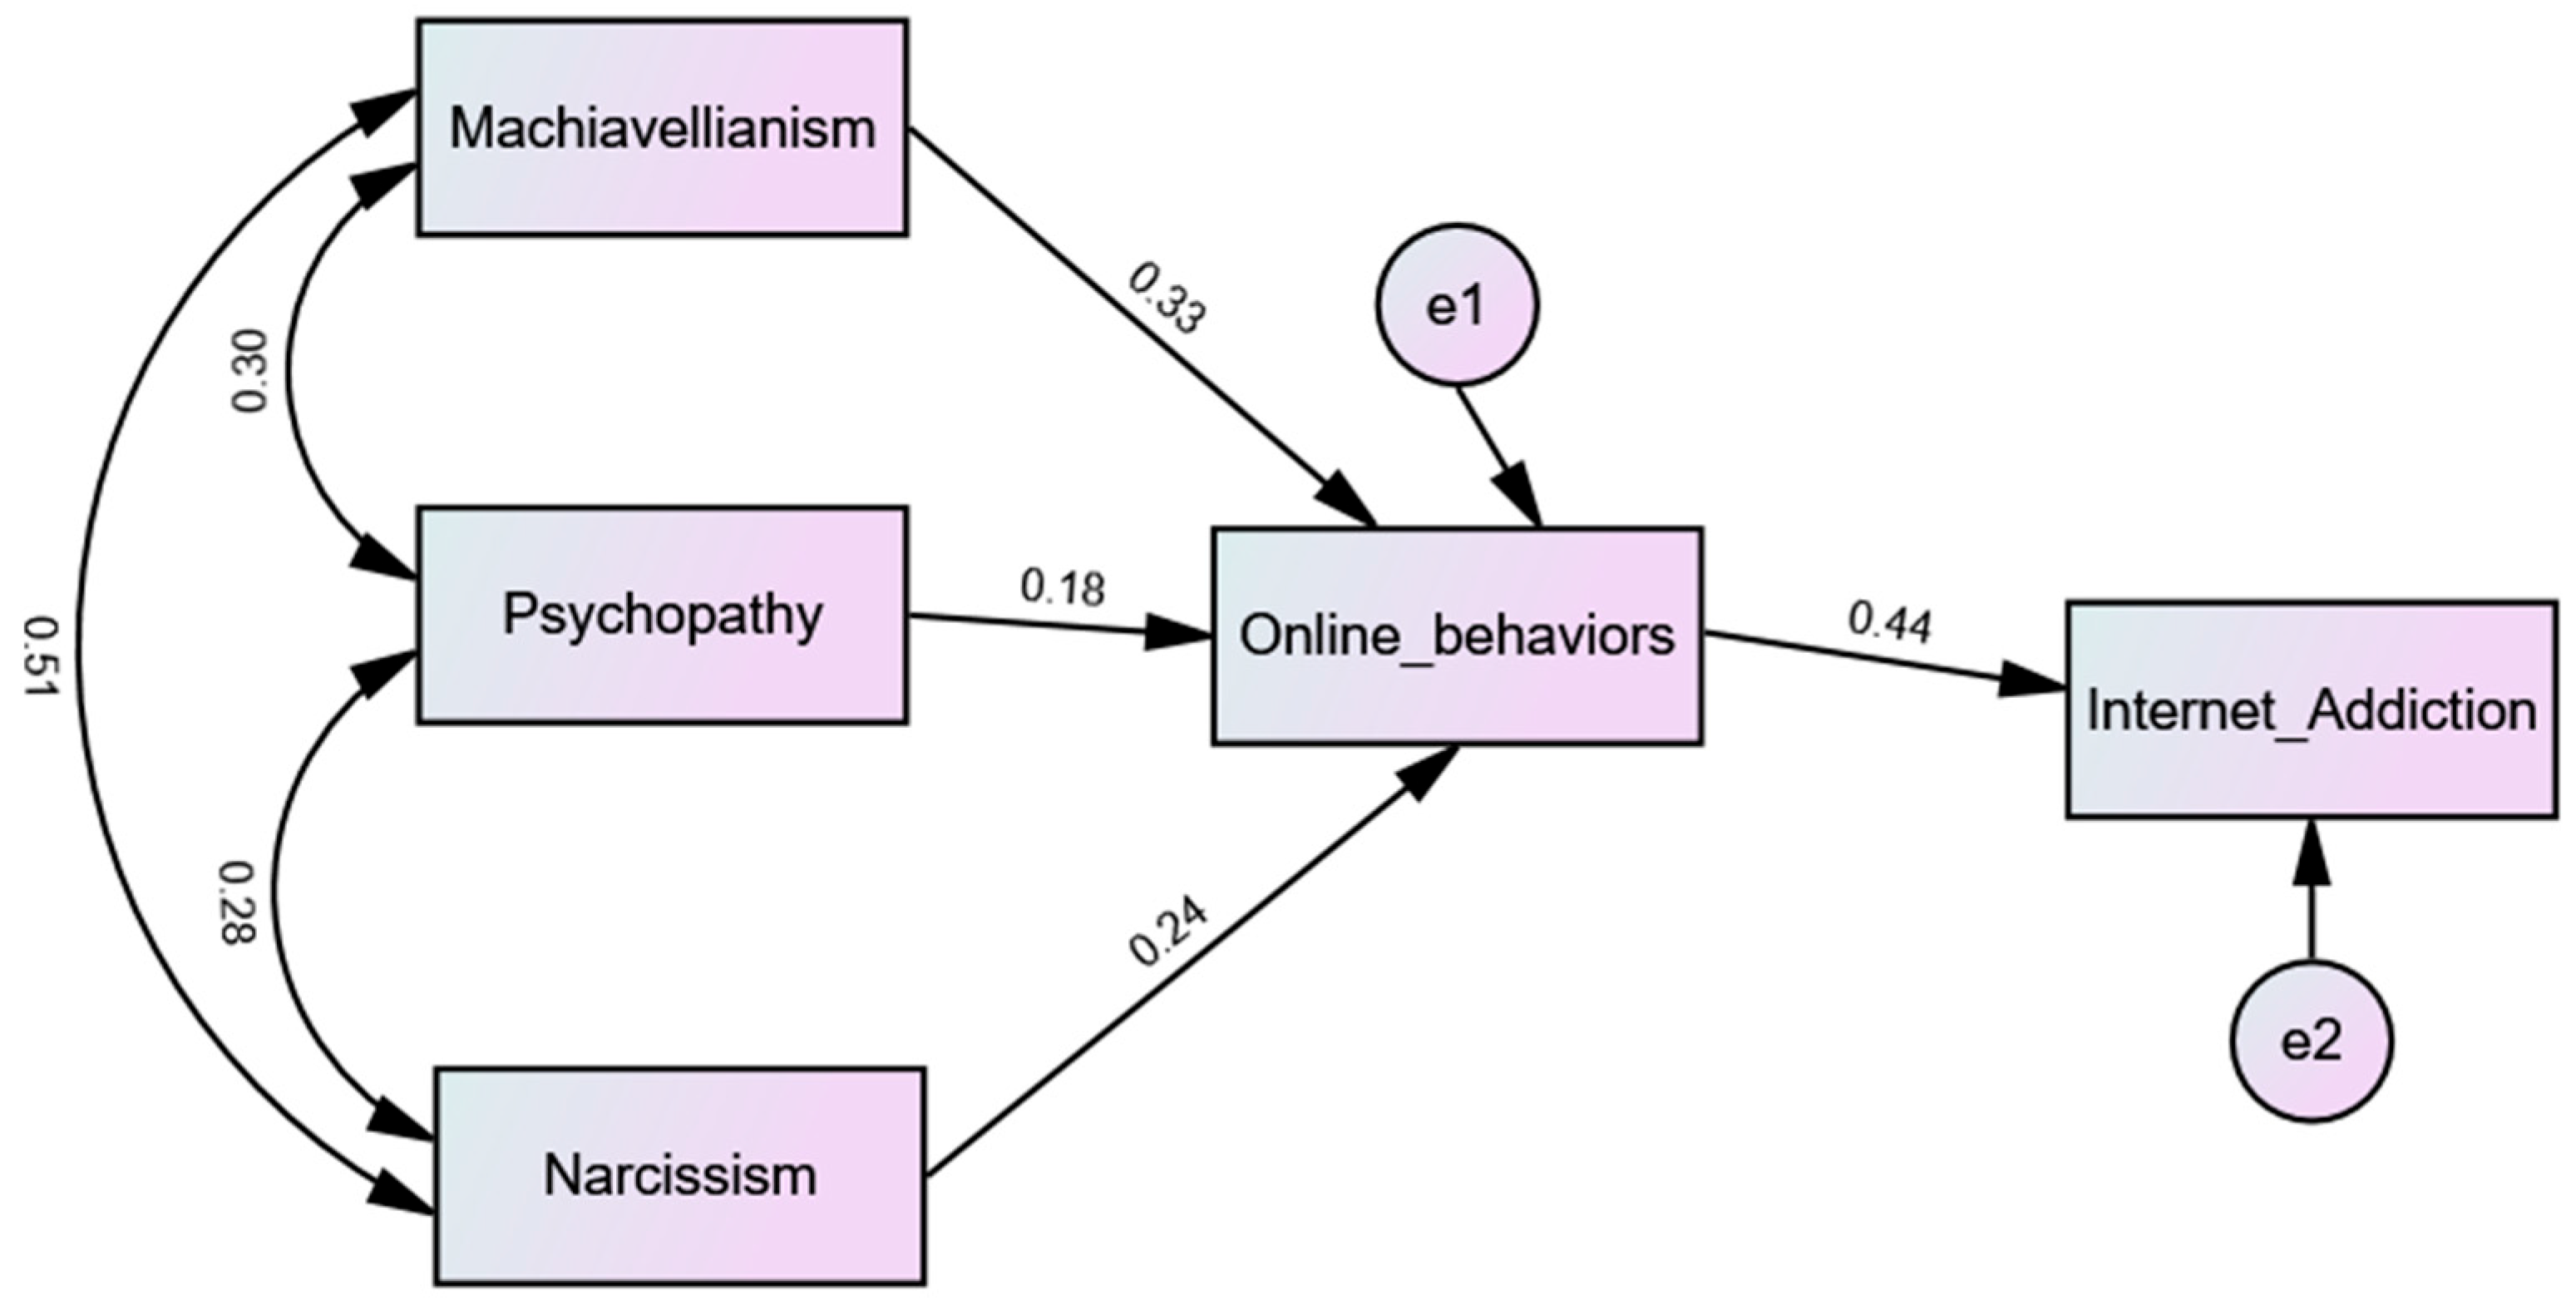 A Qualitative Analysis of Internet Trolling  Cyberpsychology, Behavior,  and Social Networking